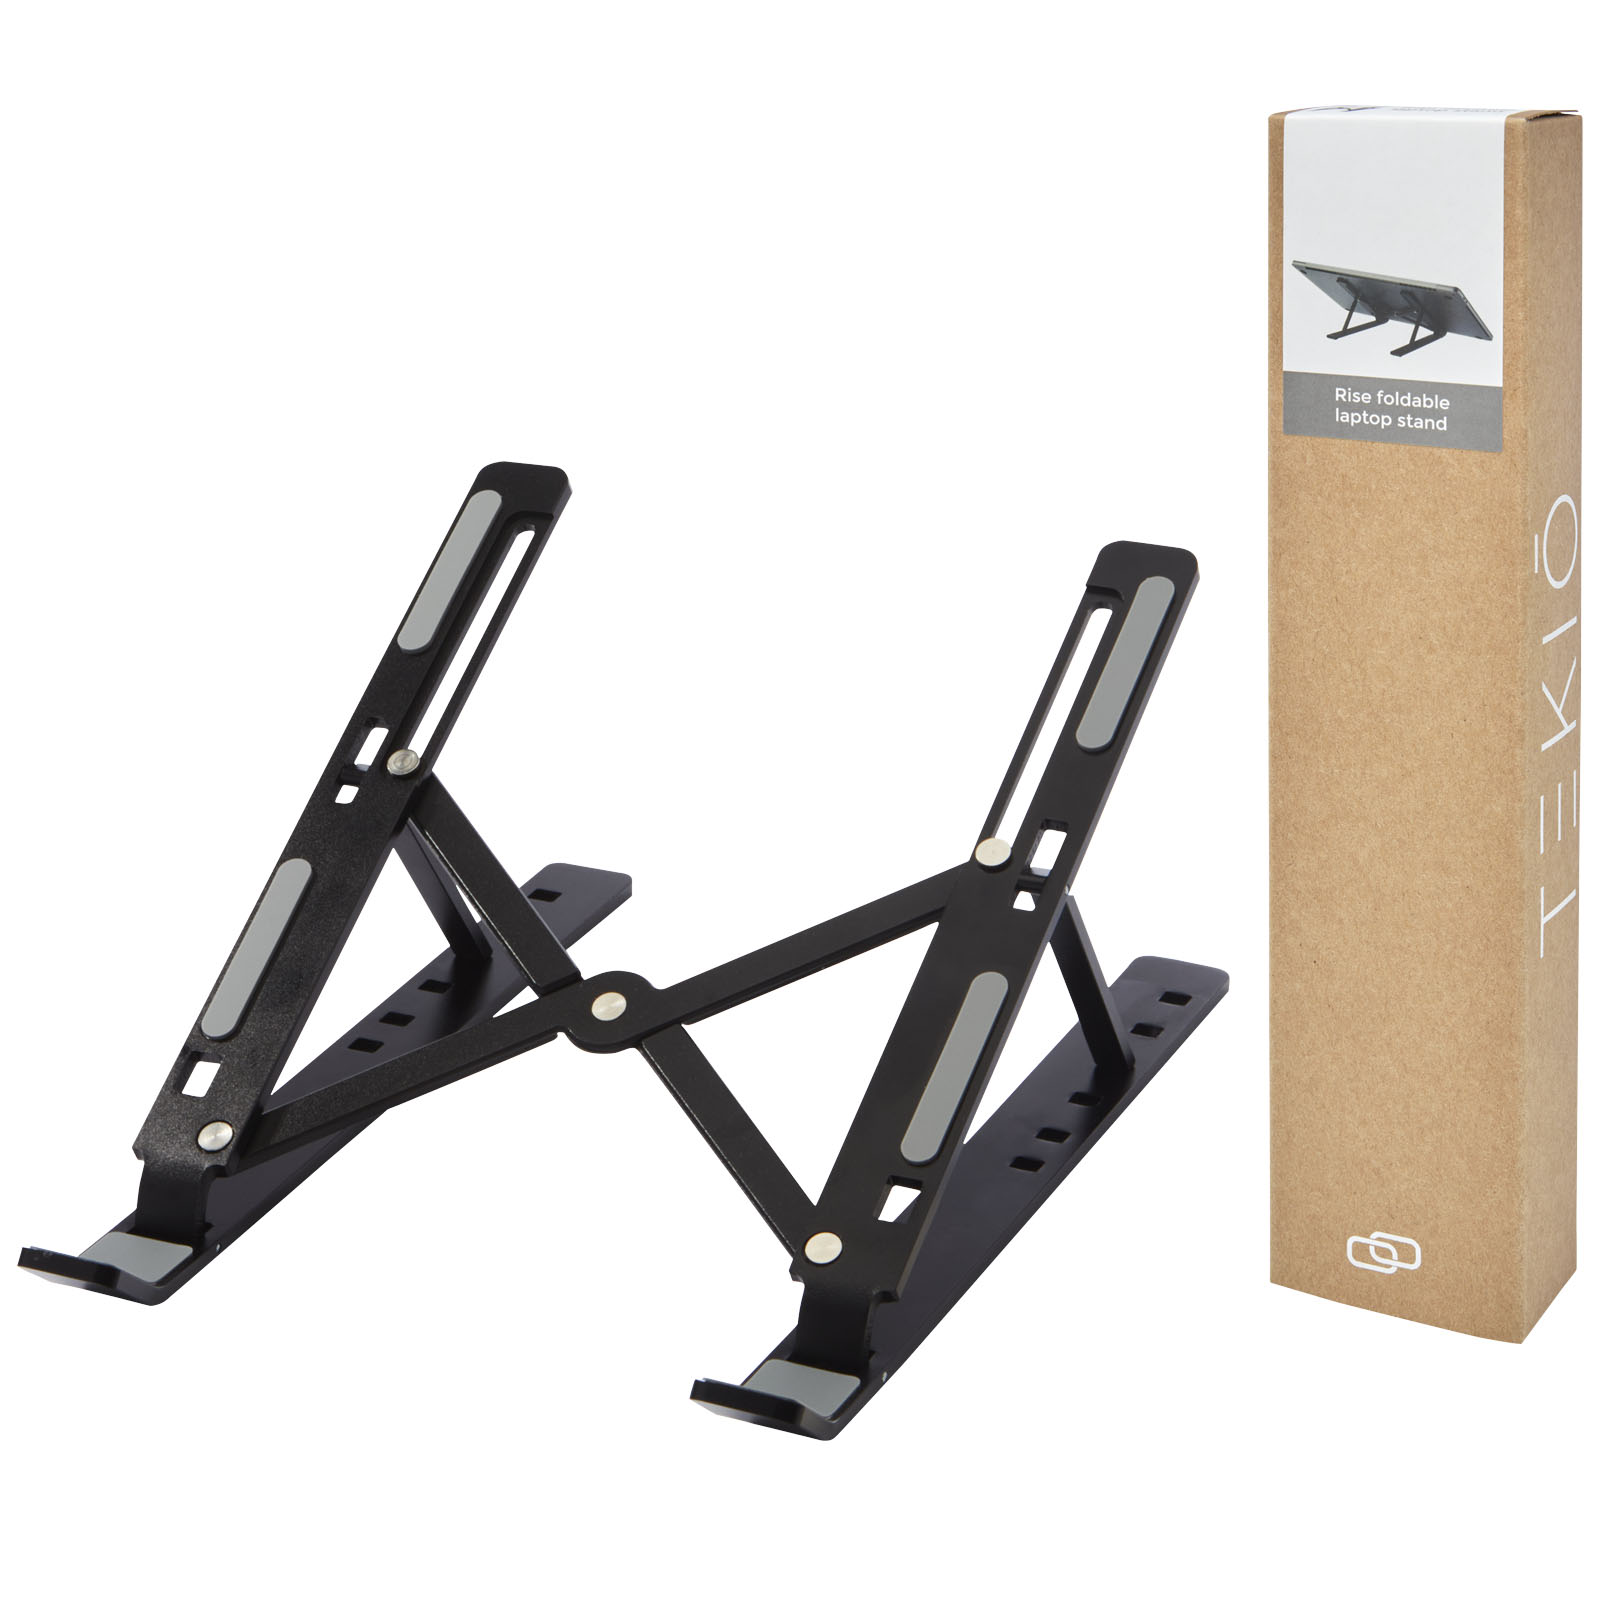 Advertising Stands & Holders - Rise foldable laptop stand - 5